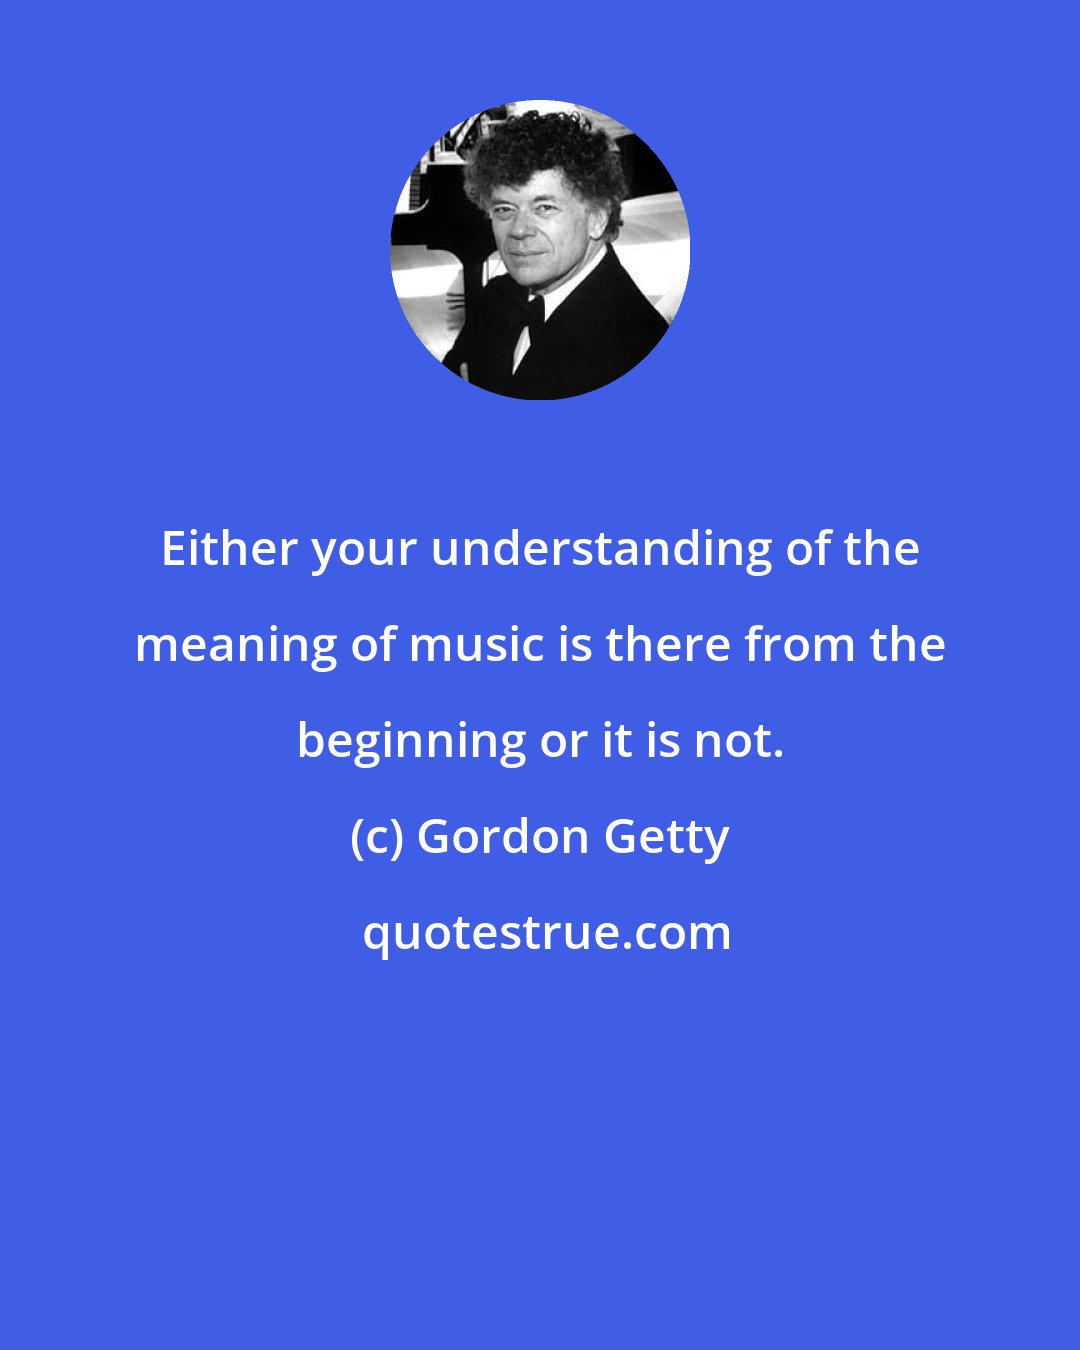 Gordon Getty: Either your understanding of the meaning of music is there from the beginning or it is not.